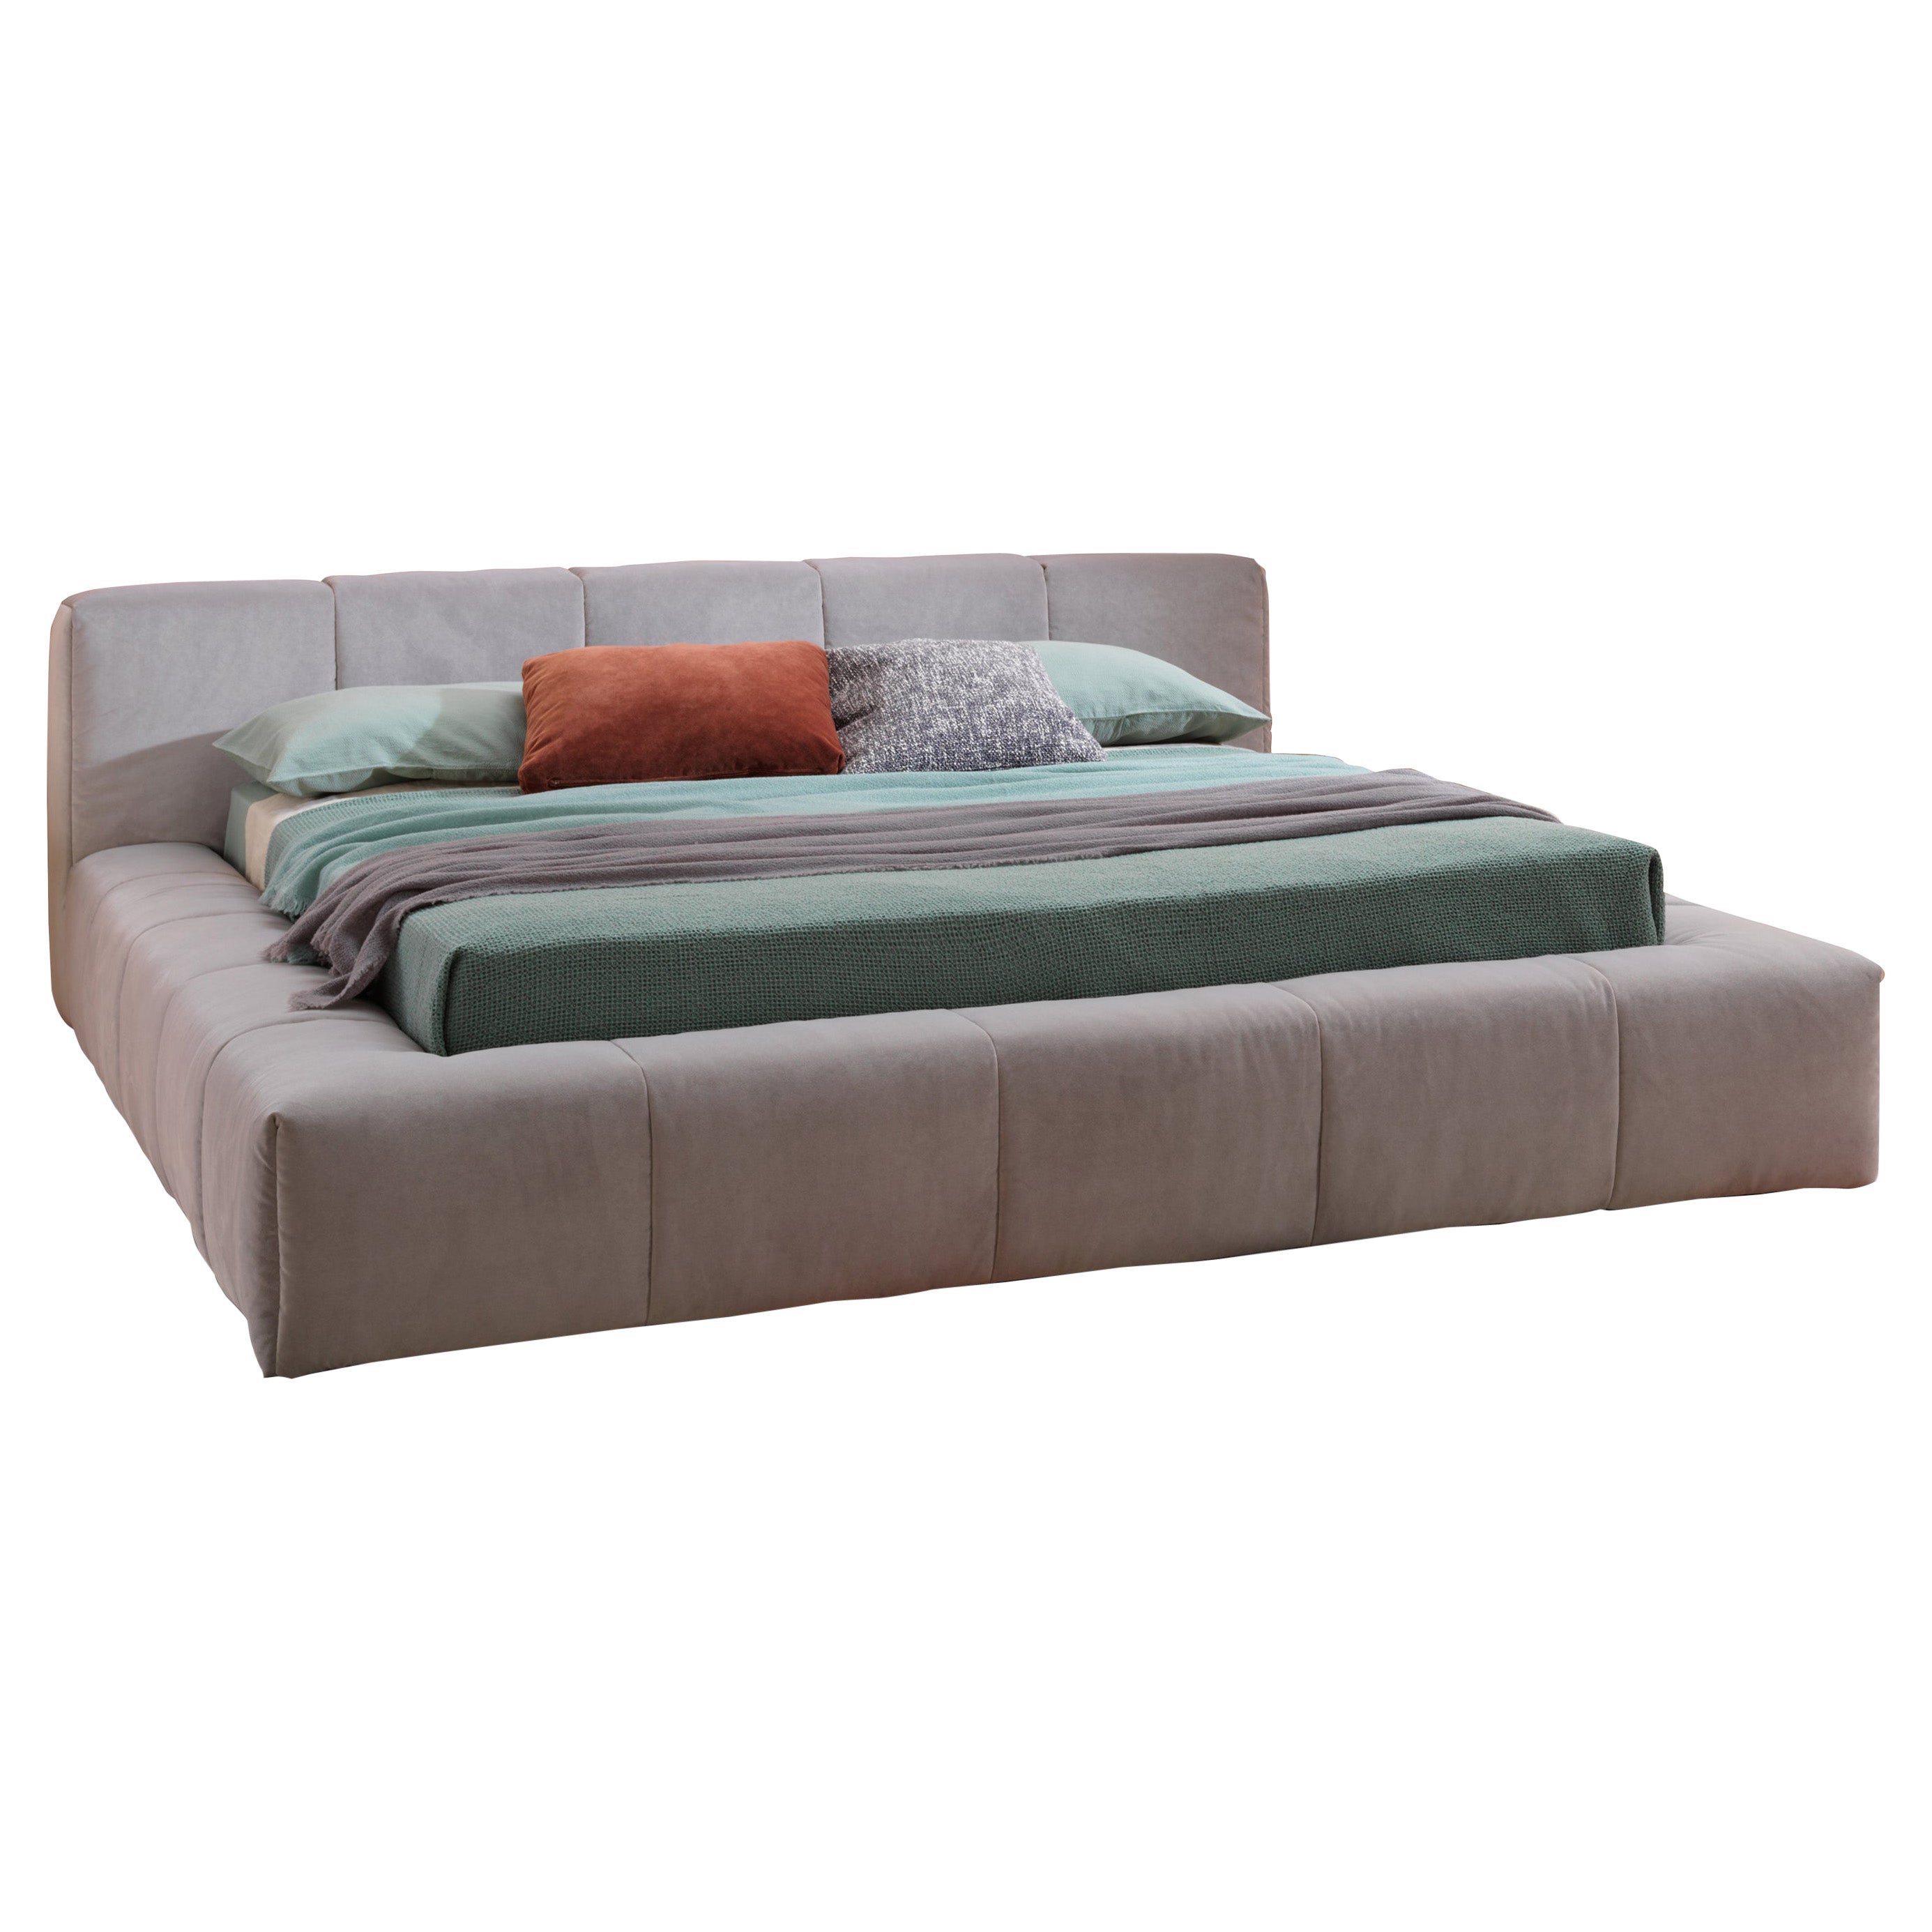 Pixel Box Large King Size Bed in Velvet Upholstery with Base by Sergio Bicego For Sale